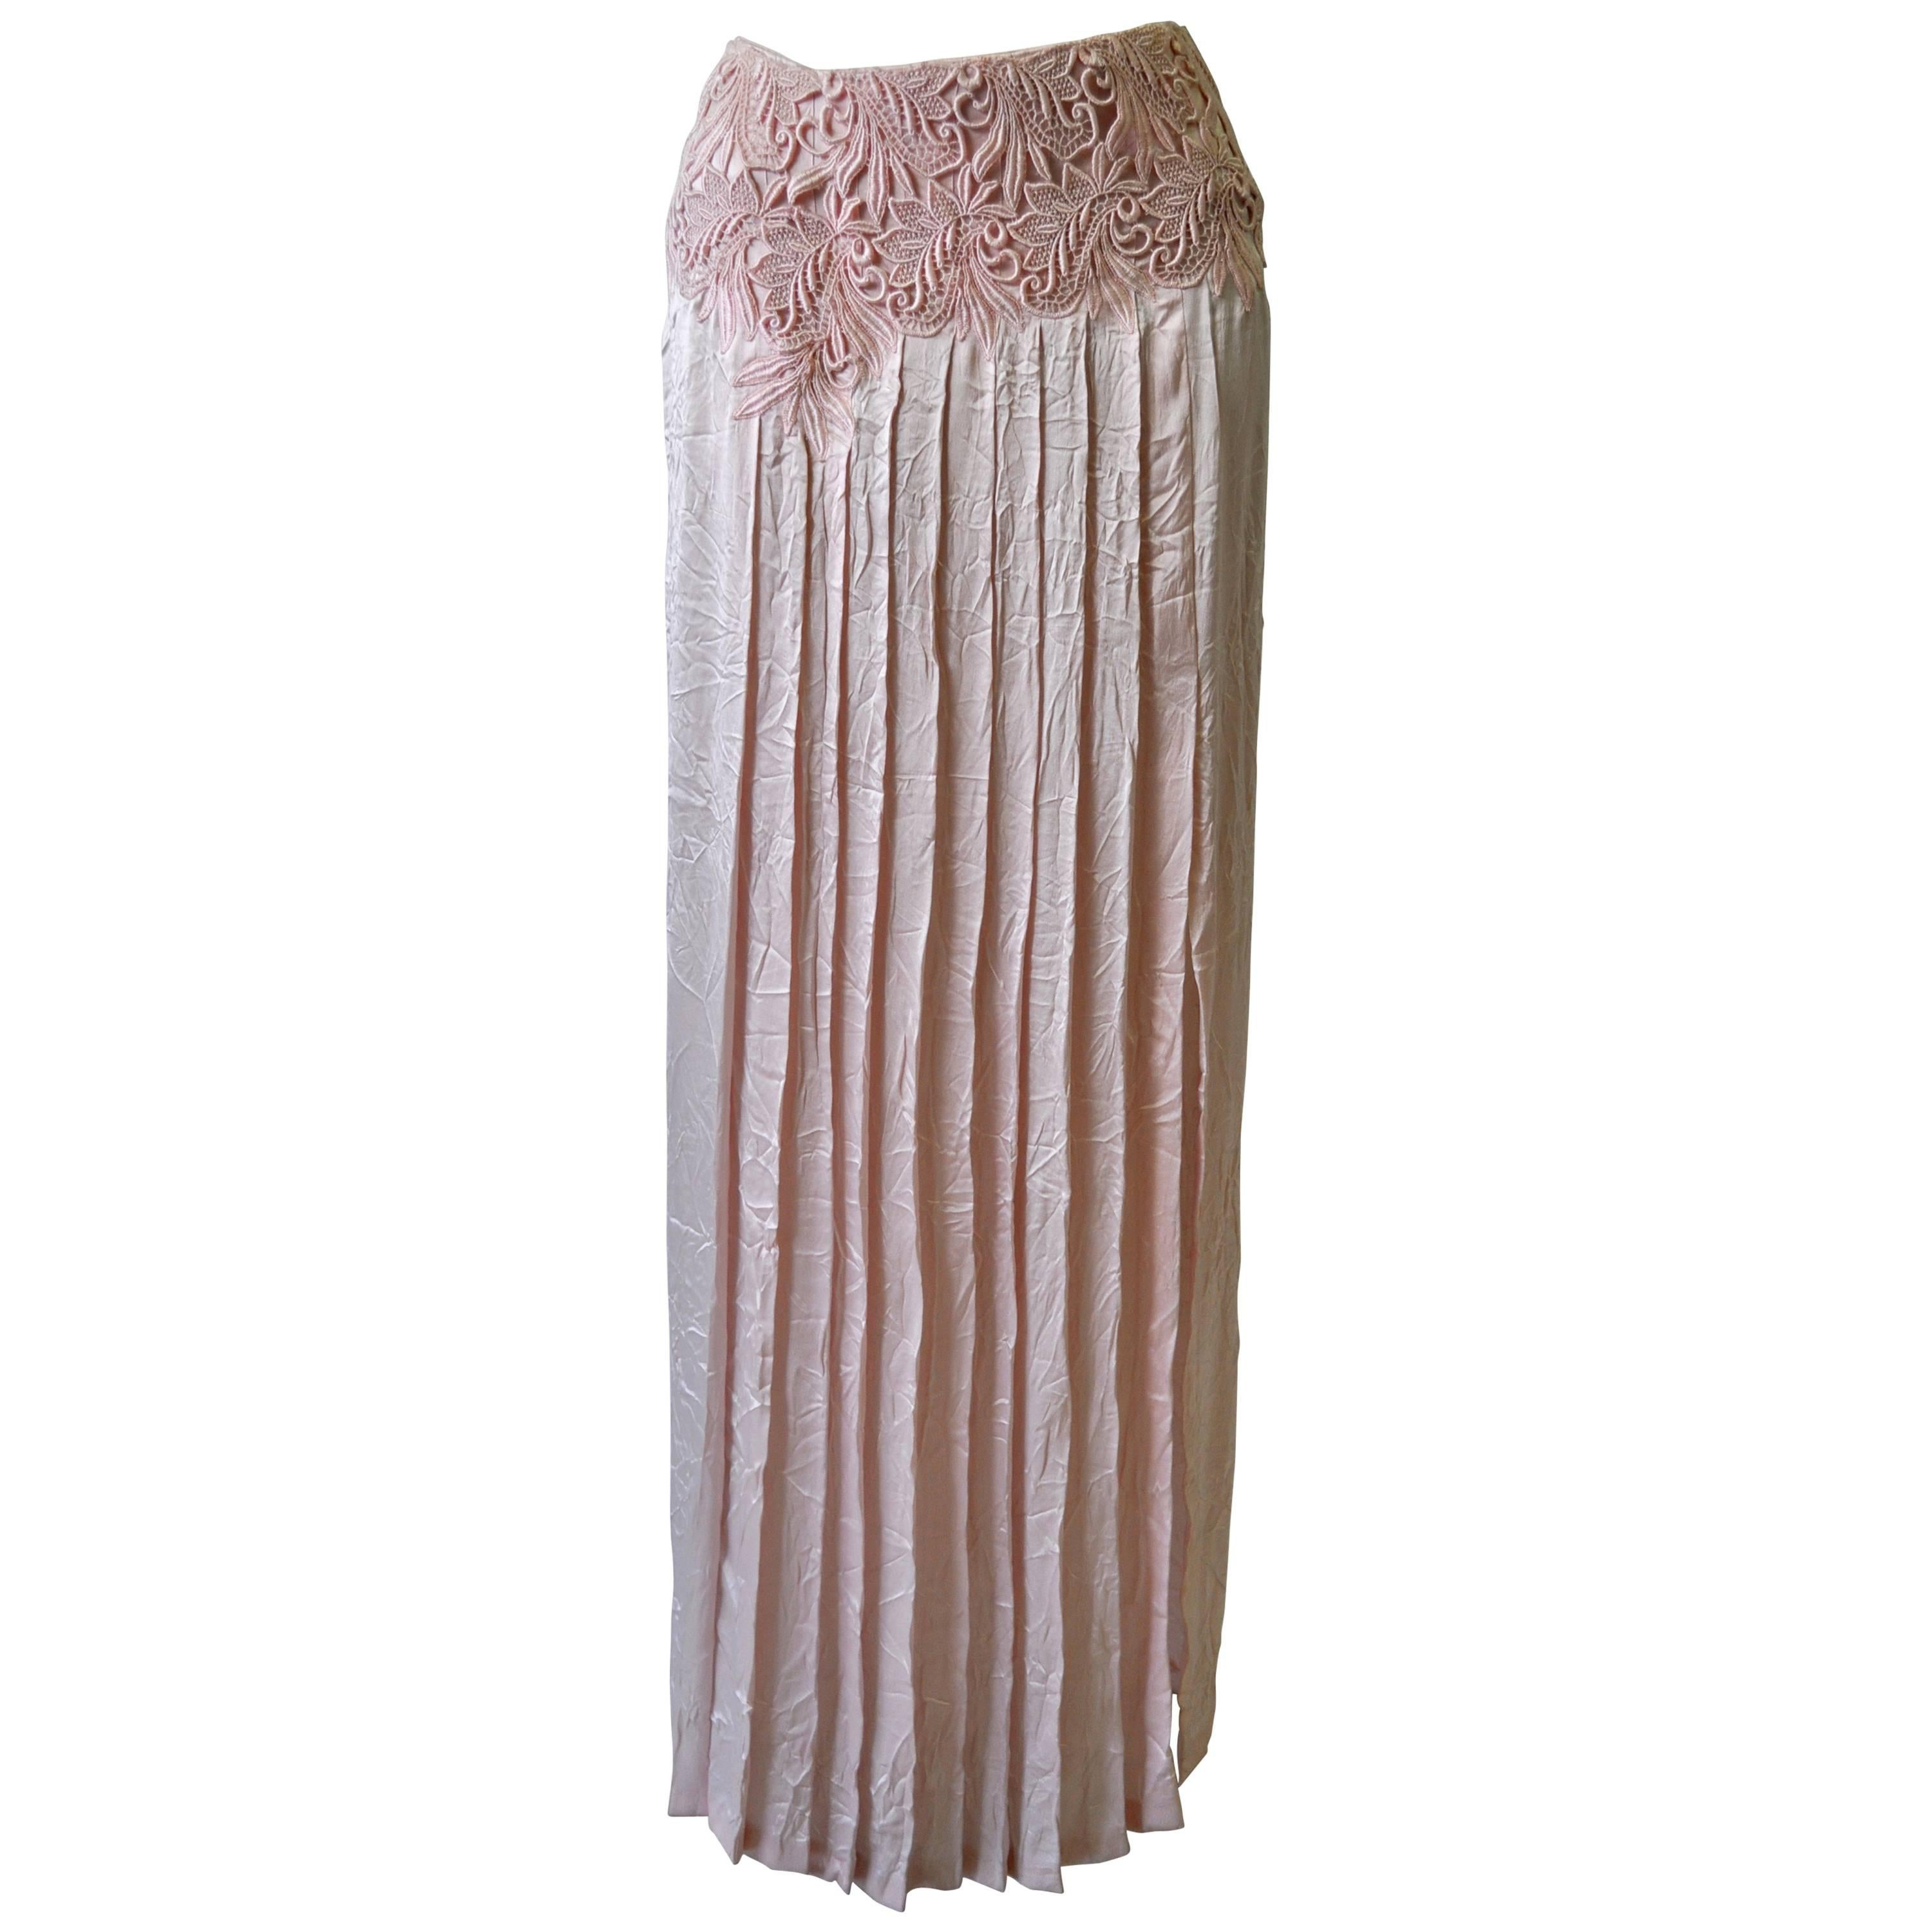 Rare Gianni Versace Couture Punk Silk "Wrinkle Chic" Maxi Skirt For Sale